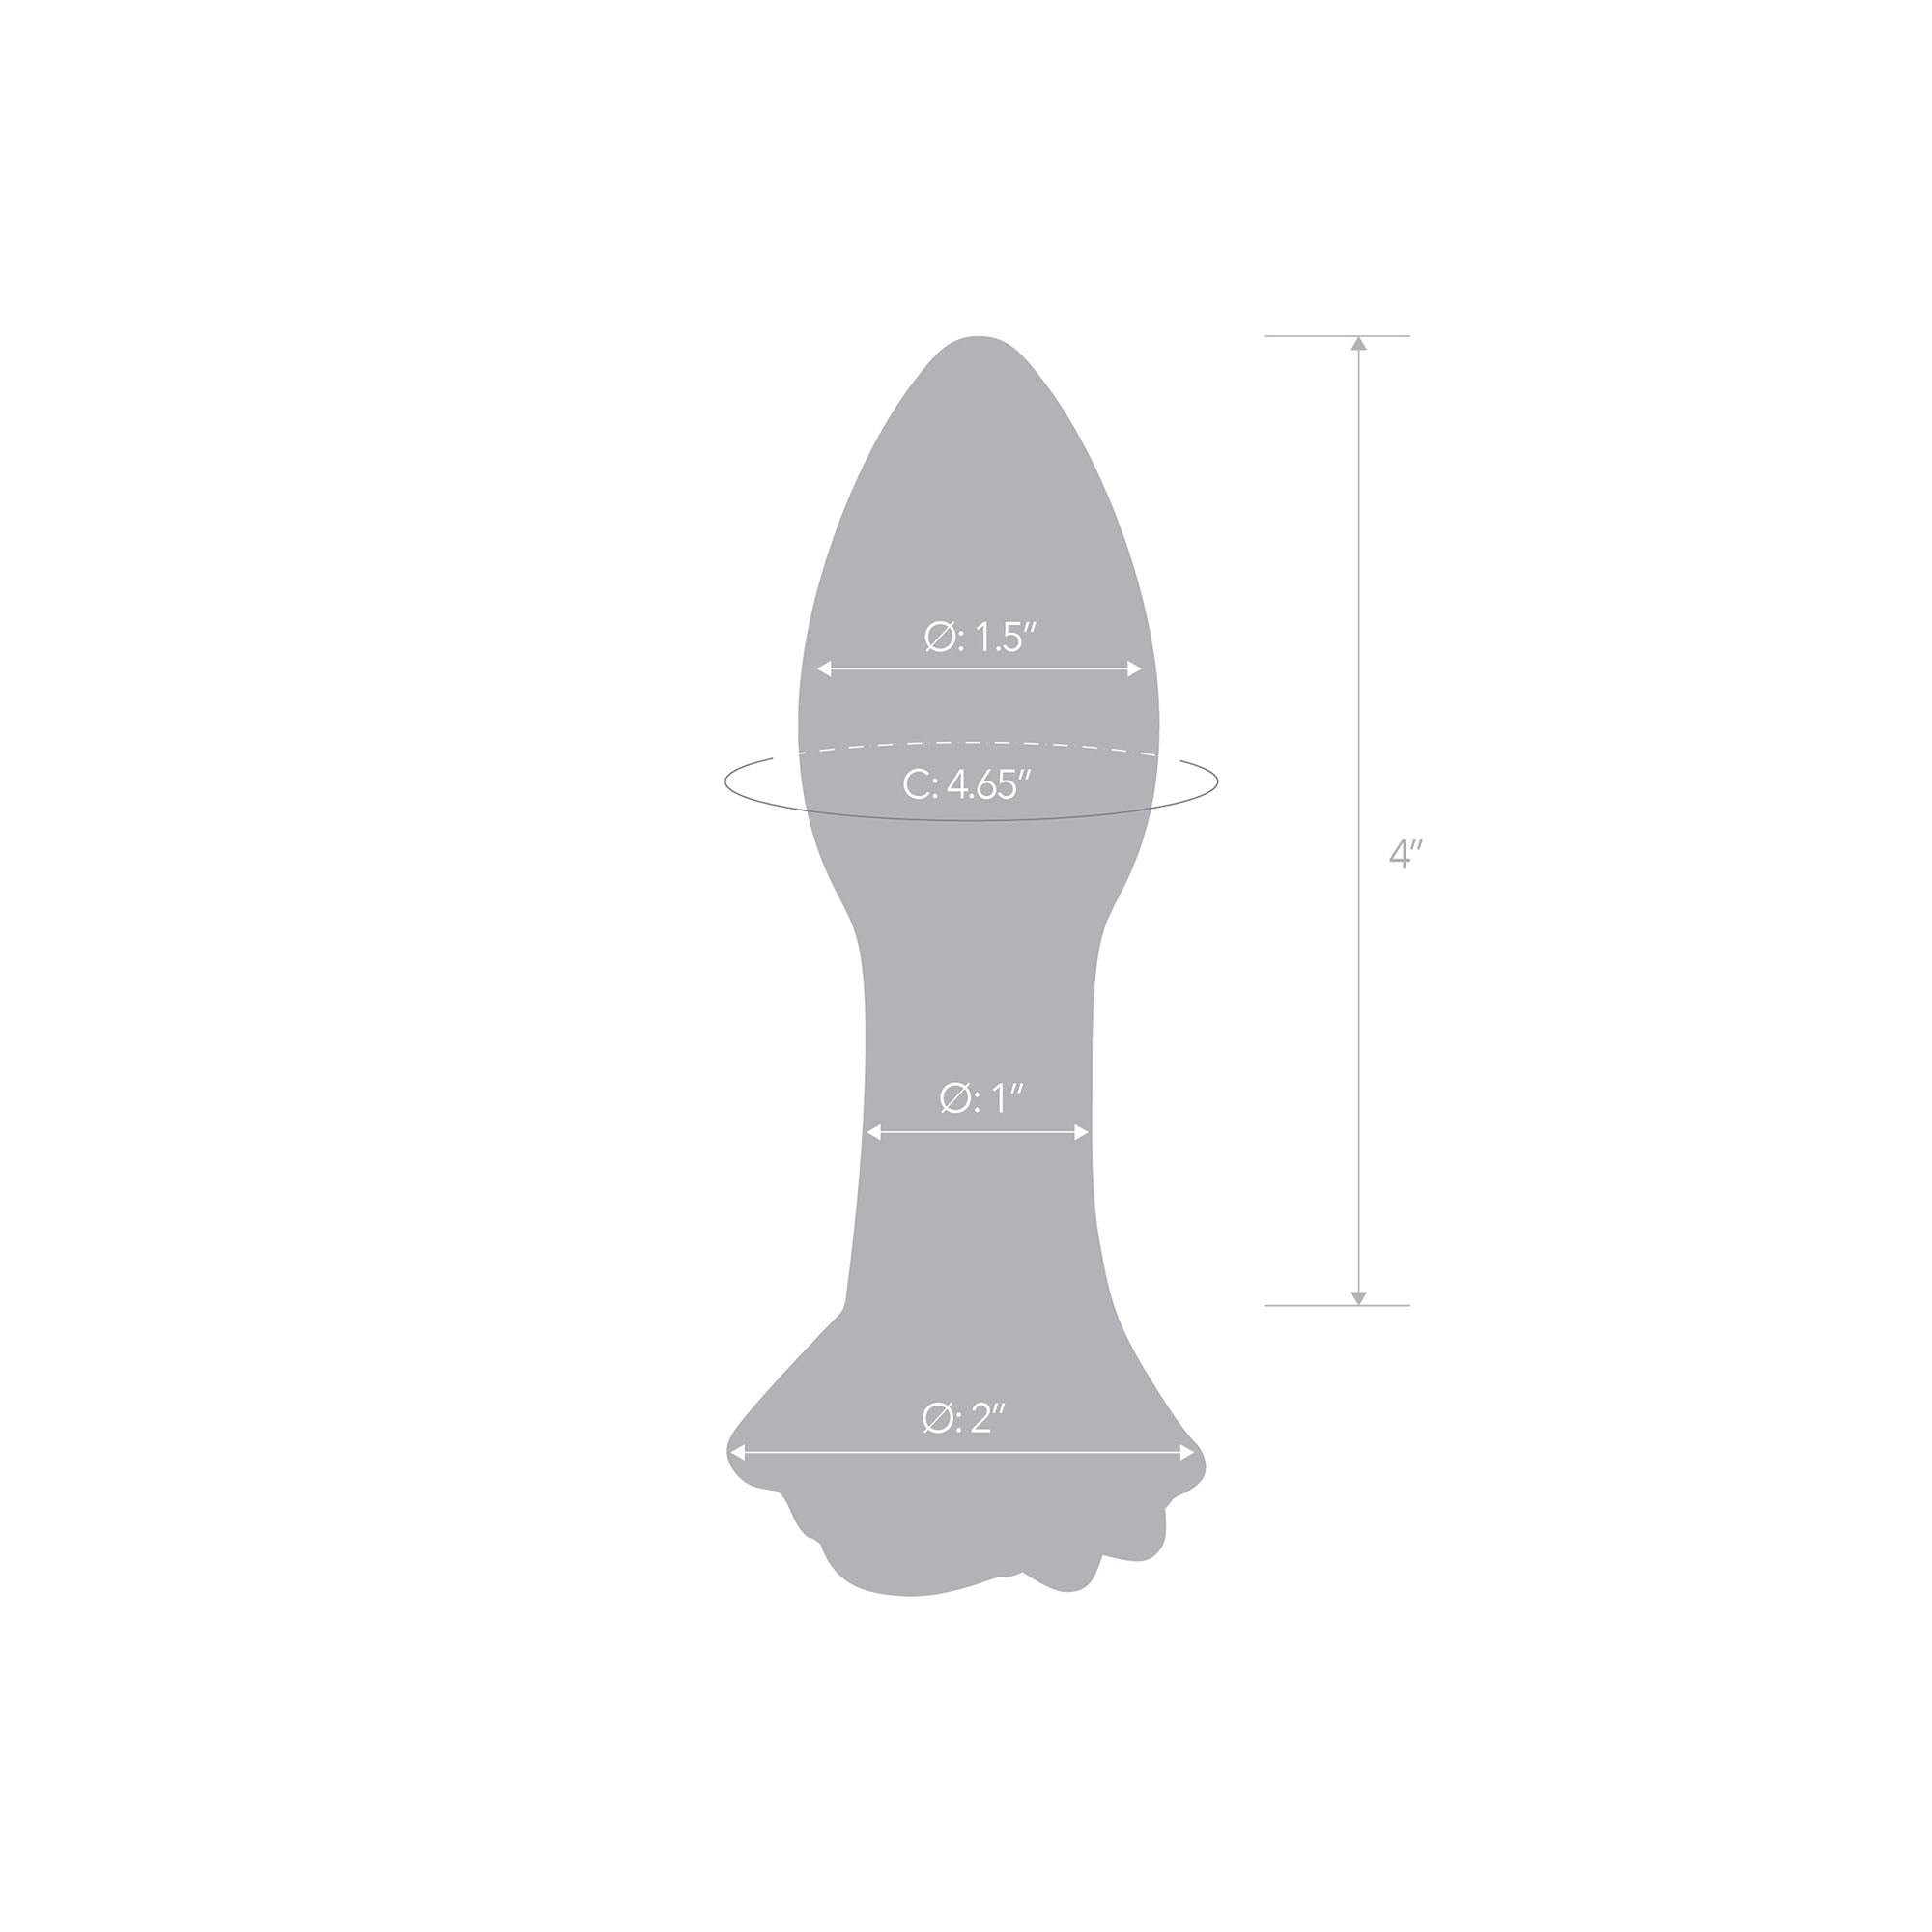 Specifications of the 5 inch Rosebud Glass Butt Plug